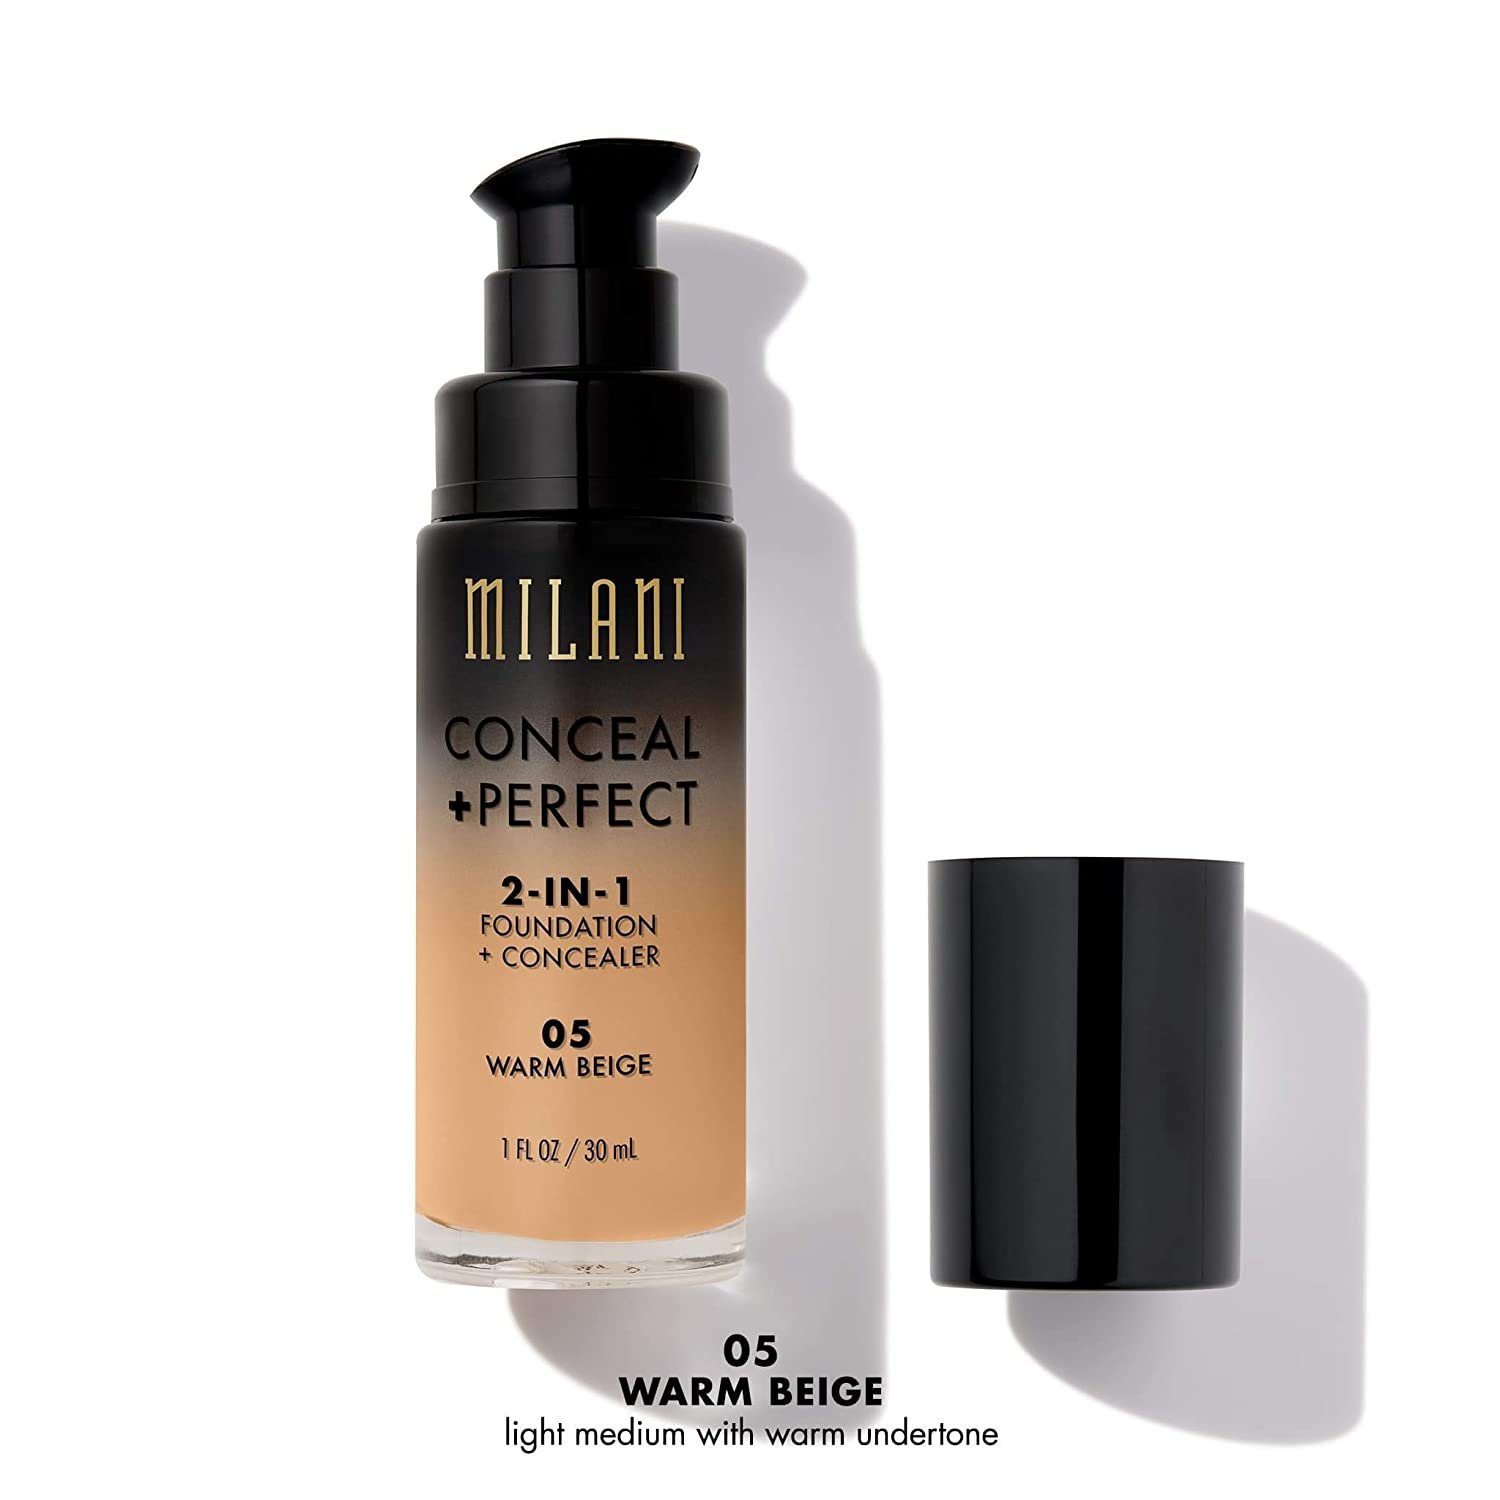 Milani Conceal + Perfect 2-in-1 Foundation + Concealer, Warm Beige - image 2 of 8